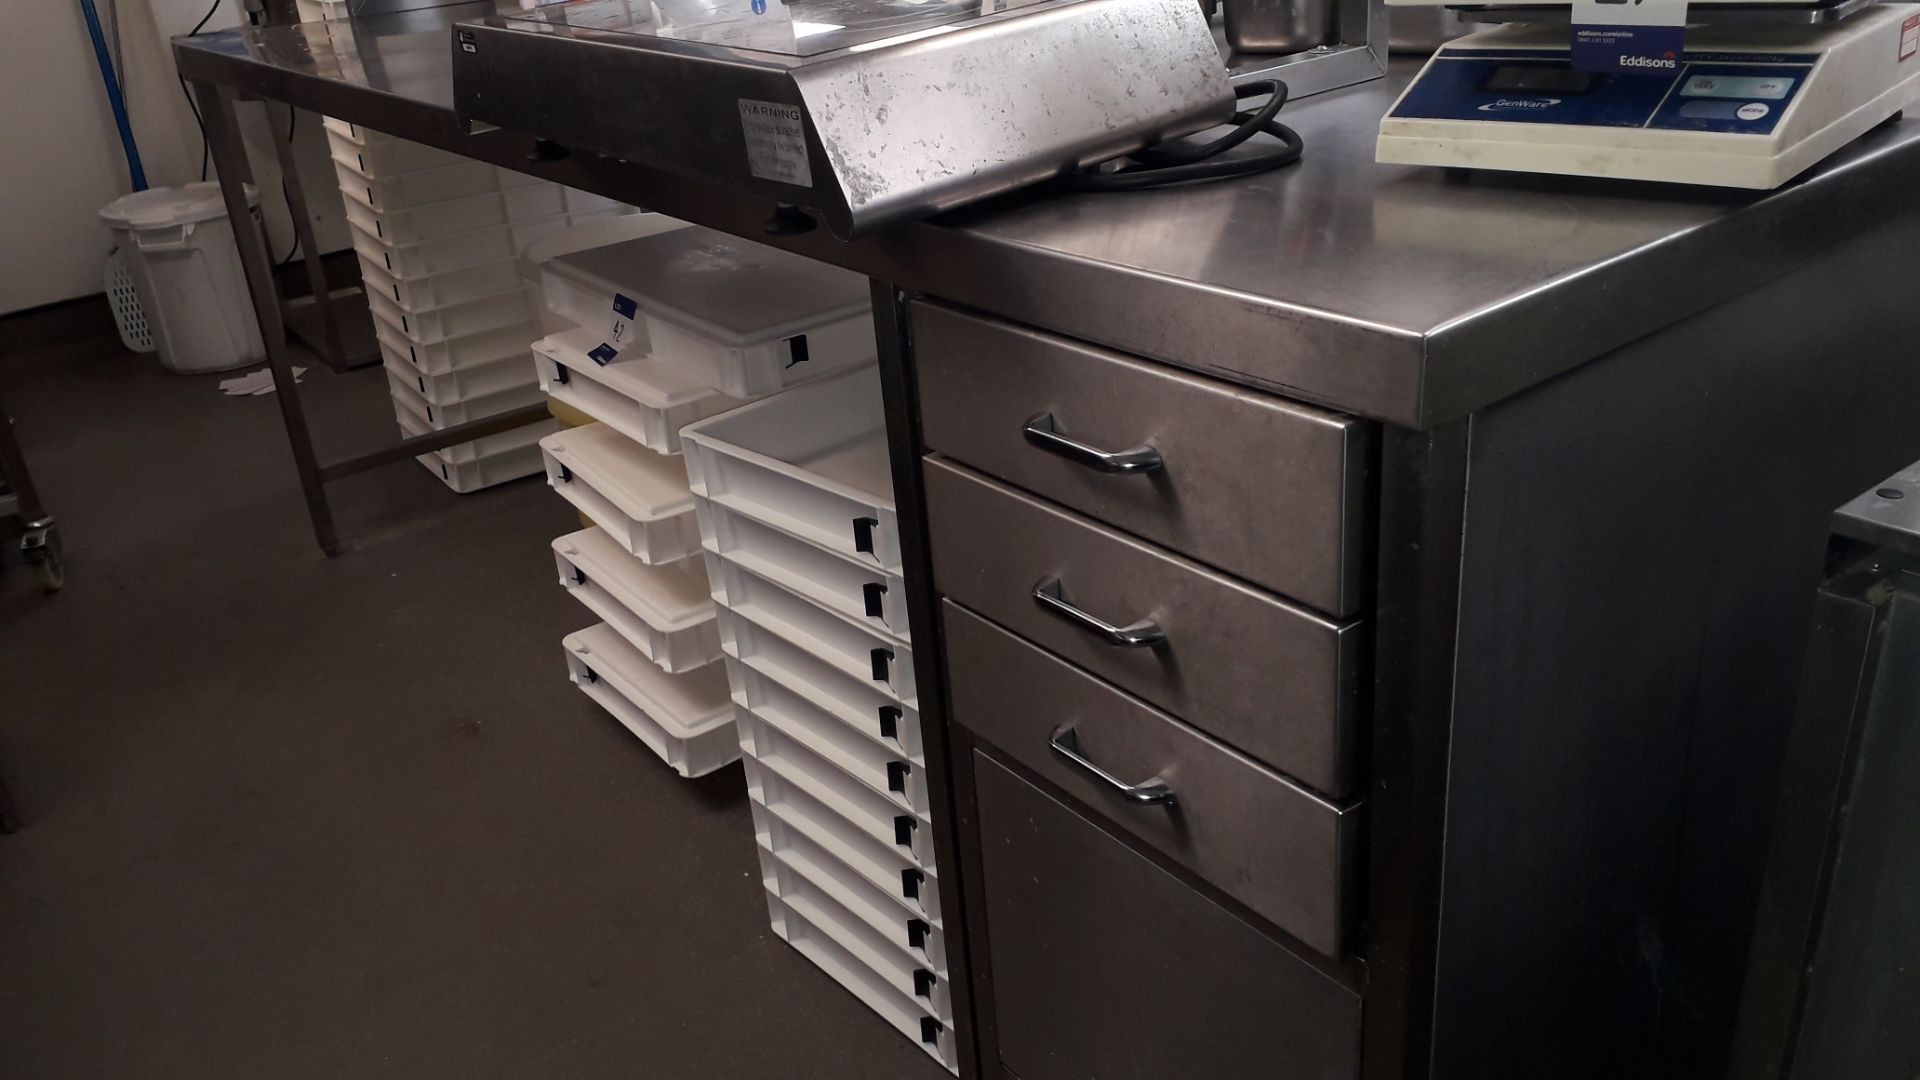 Stainless Steel Food Prep Table with Shelf over 25 - Image 2 of 3